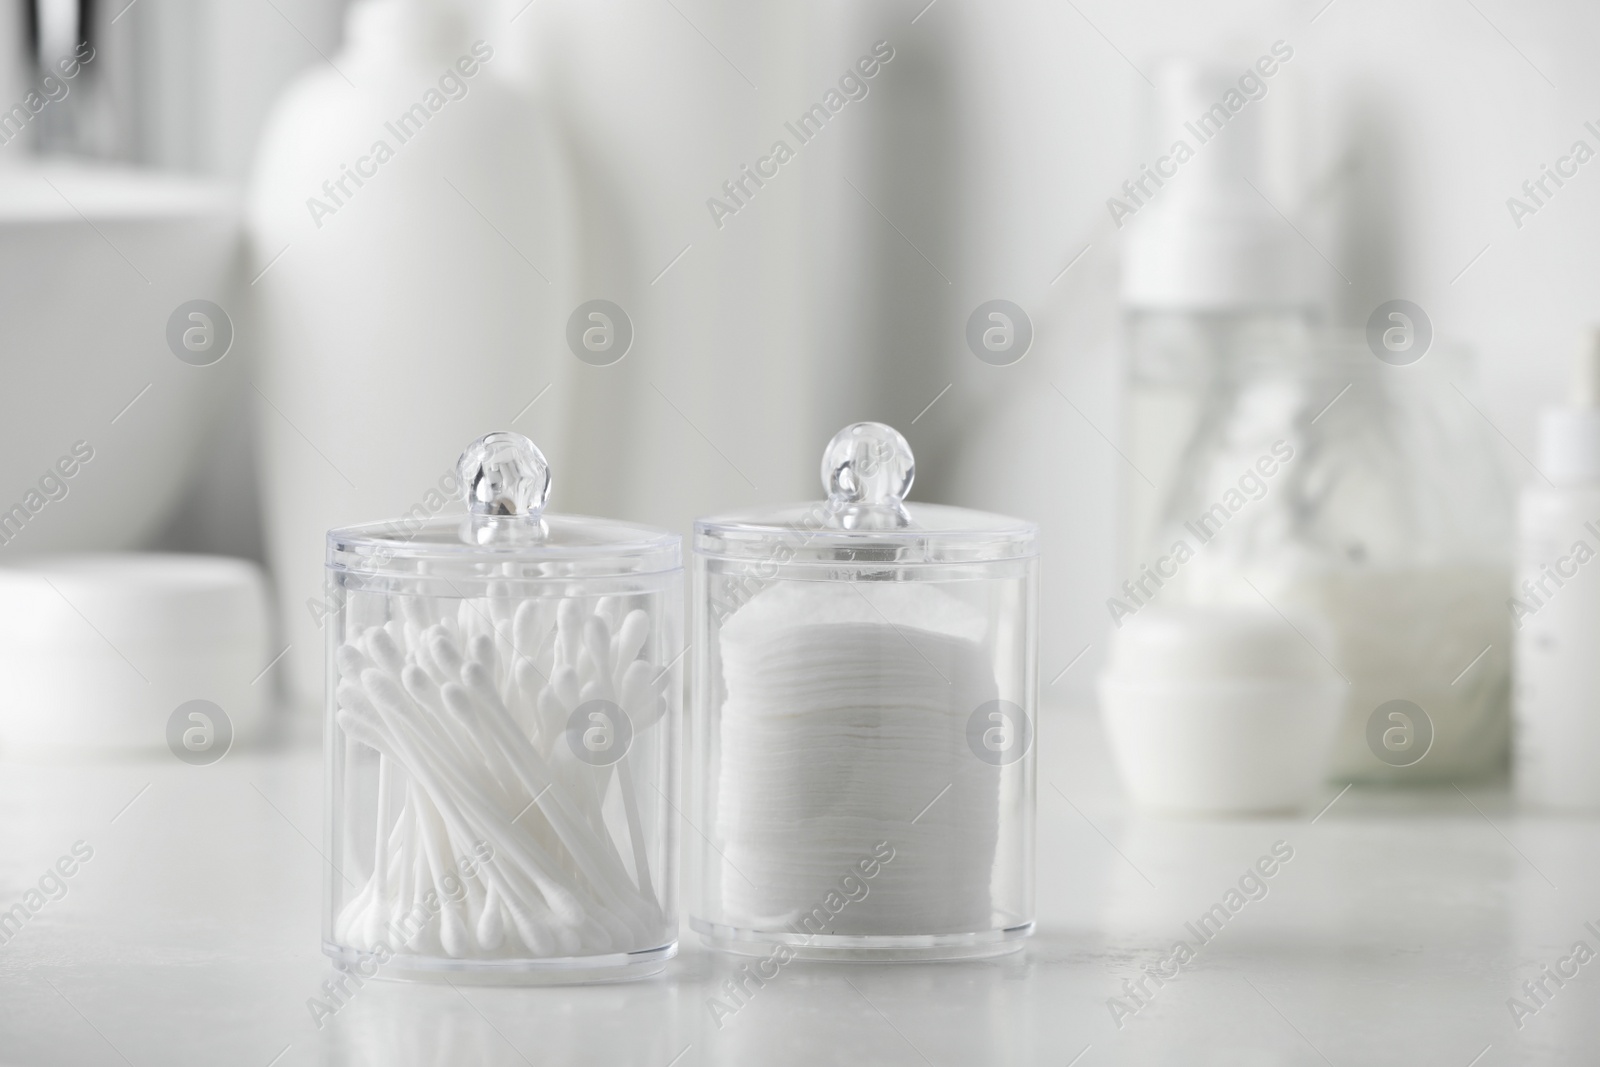 Photo of Containers with cotton swabs and pads on white countertop in bathroom